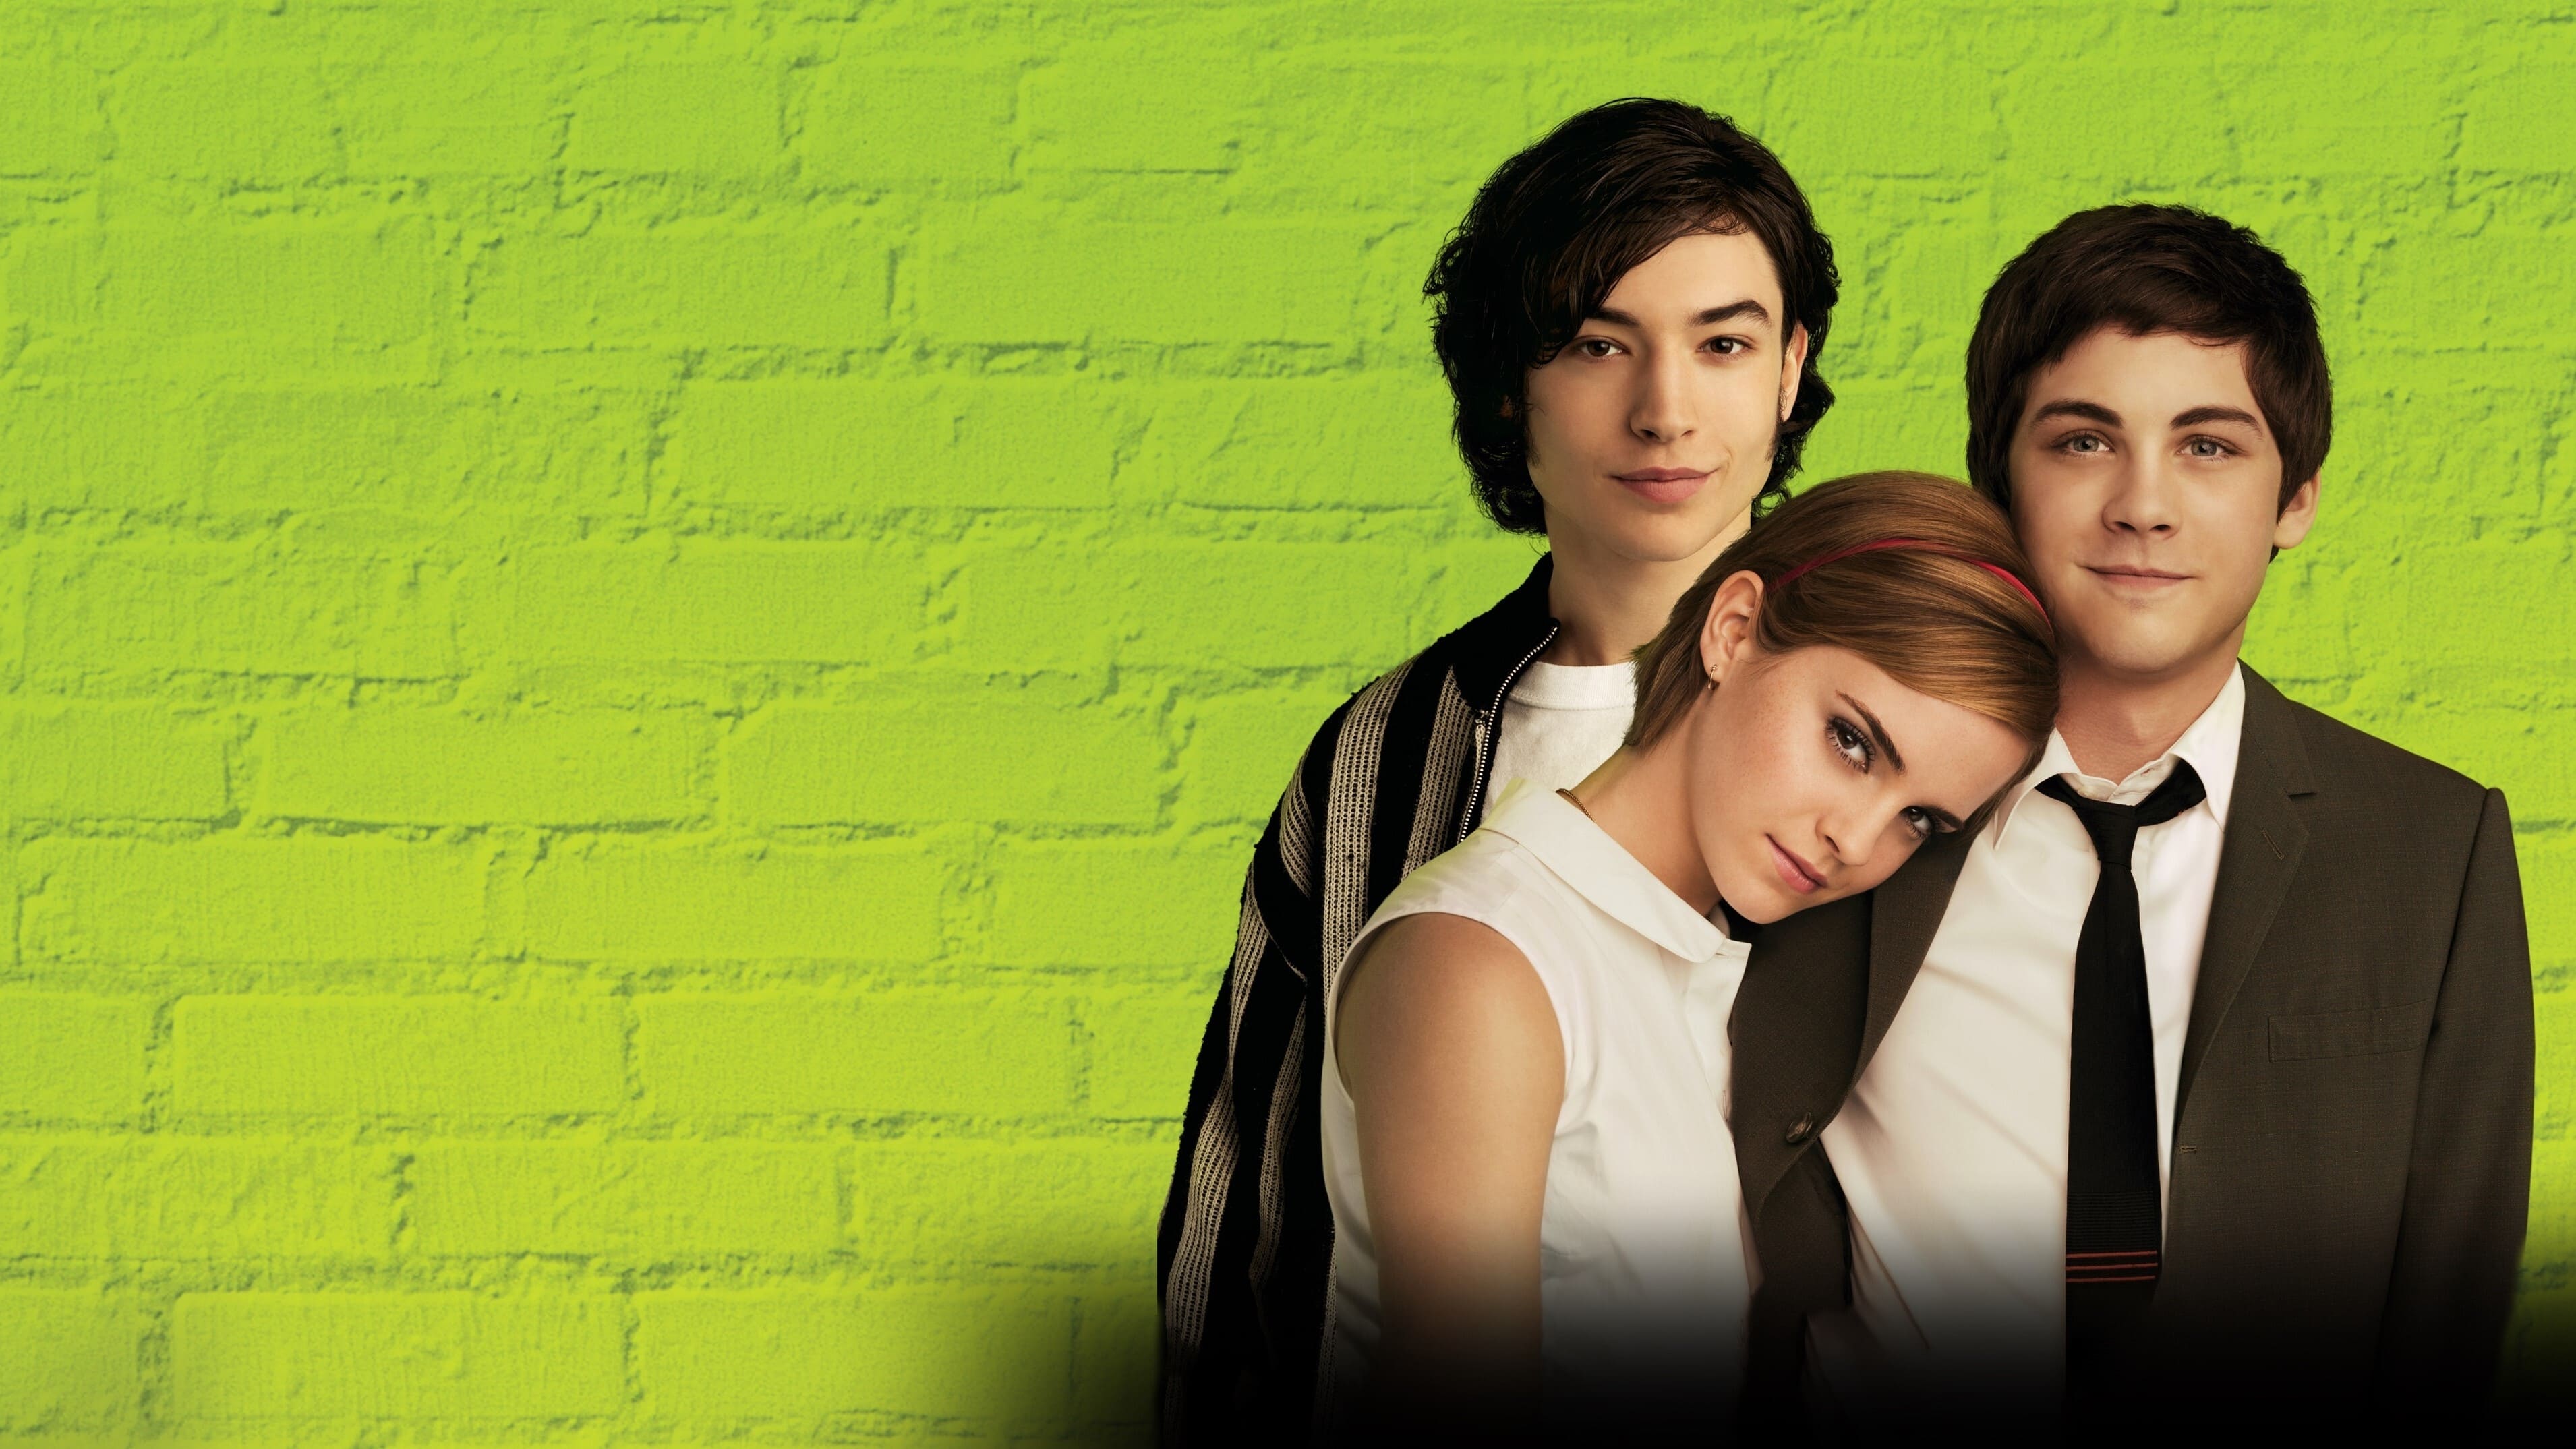 Movie The Perks of Being a Wallflower HD Wallpaper | Background Image